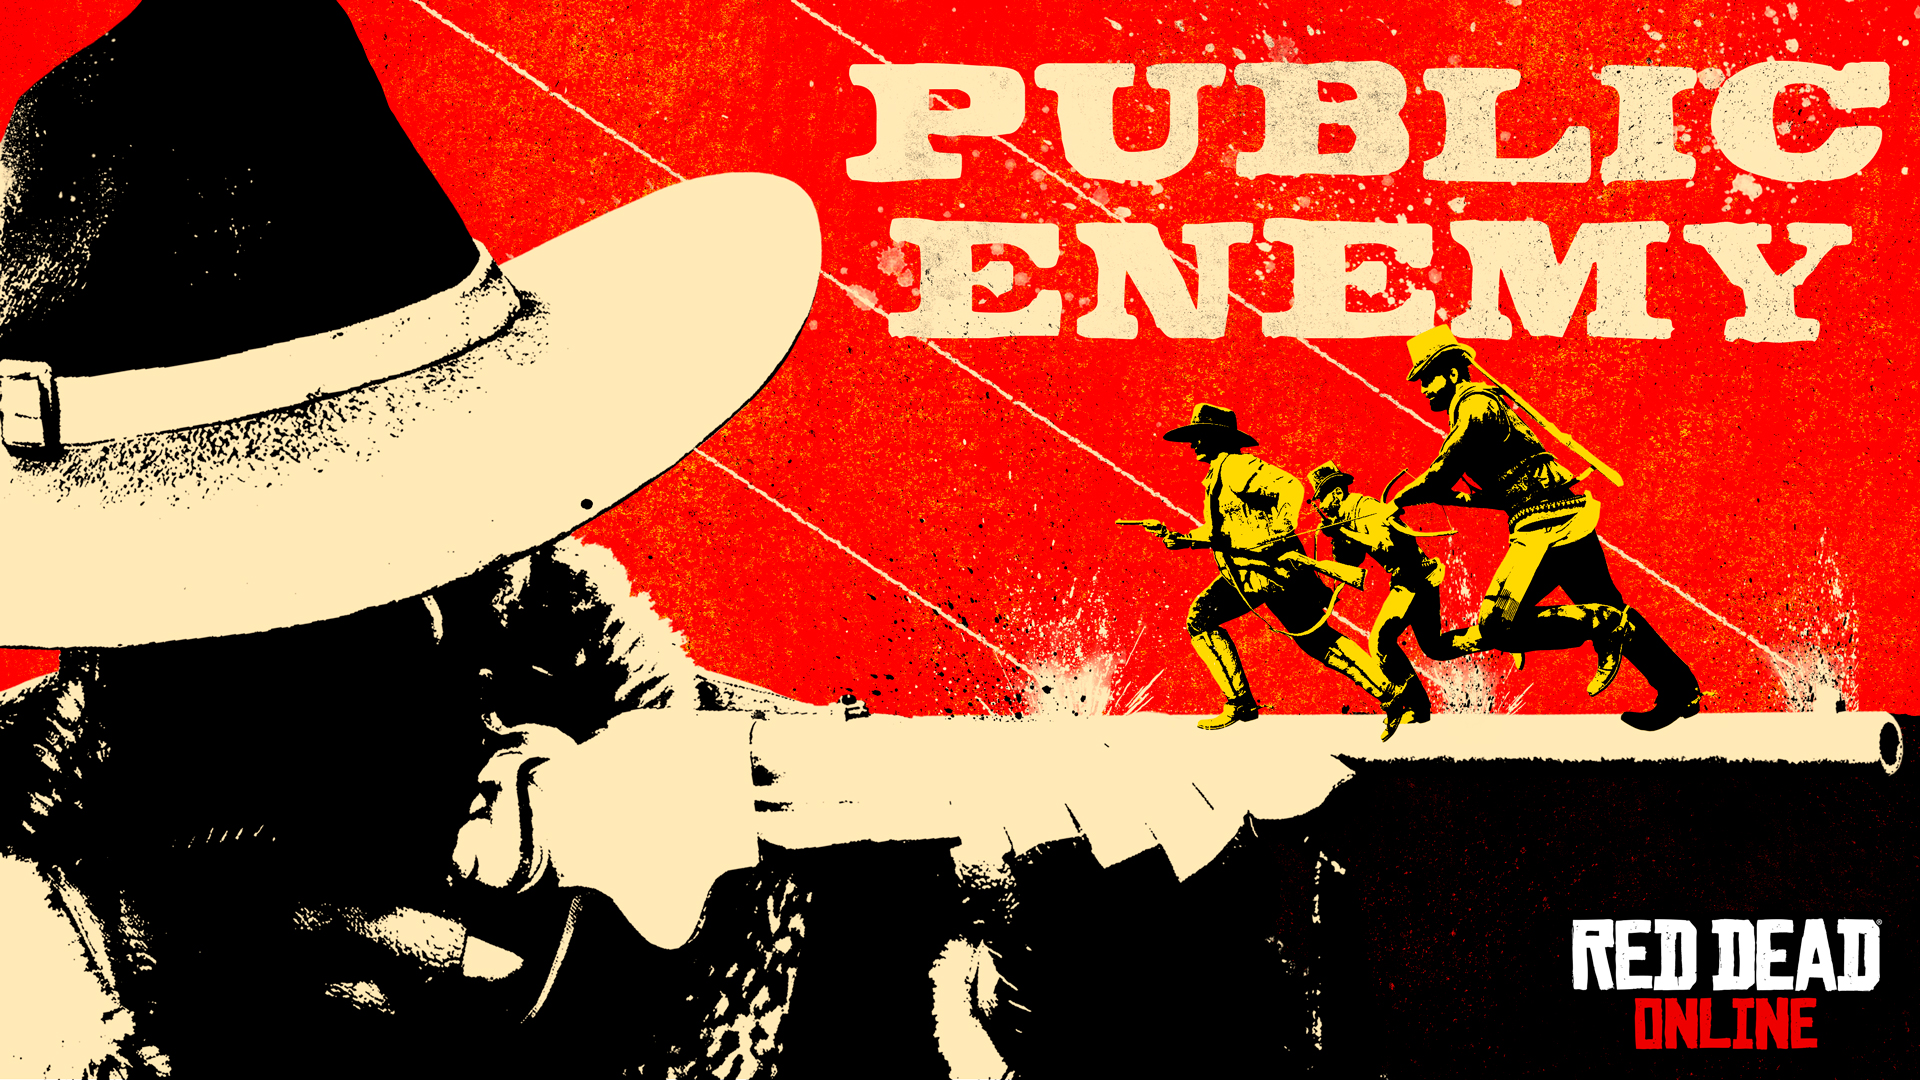 Red Dead - New public Enemy mode & Railroad Baron event now